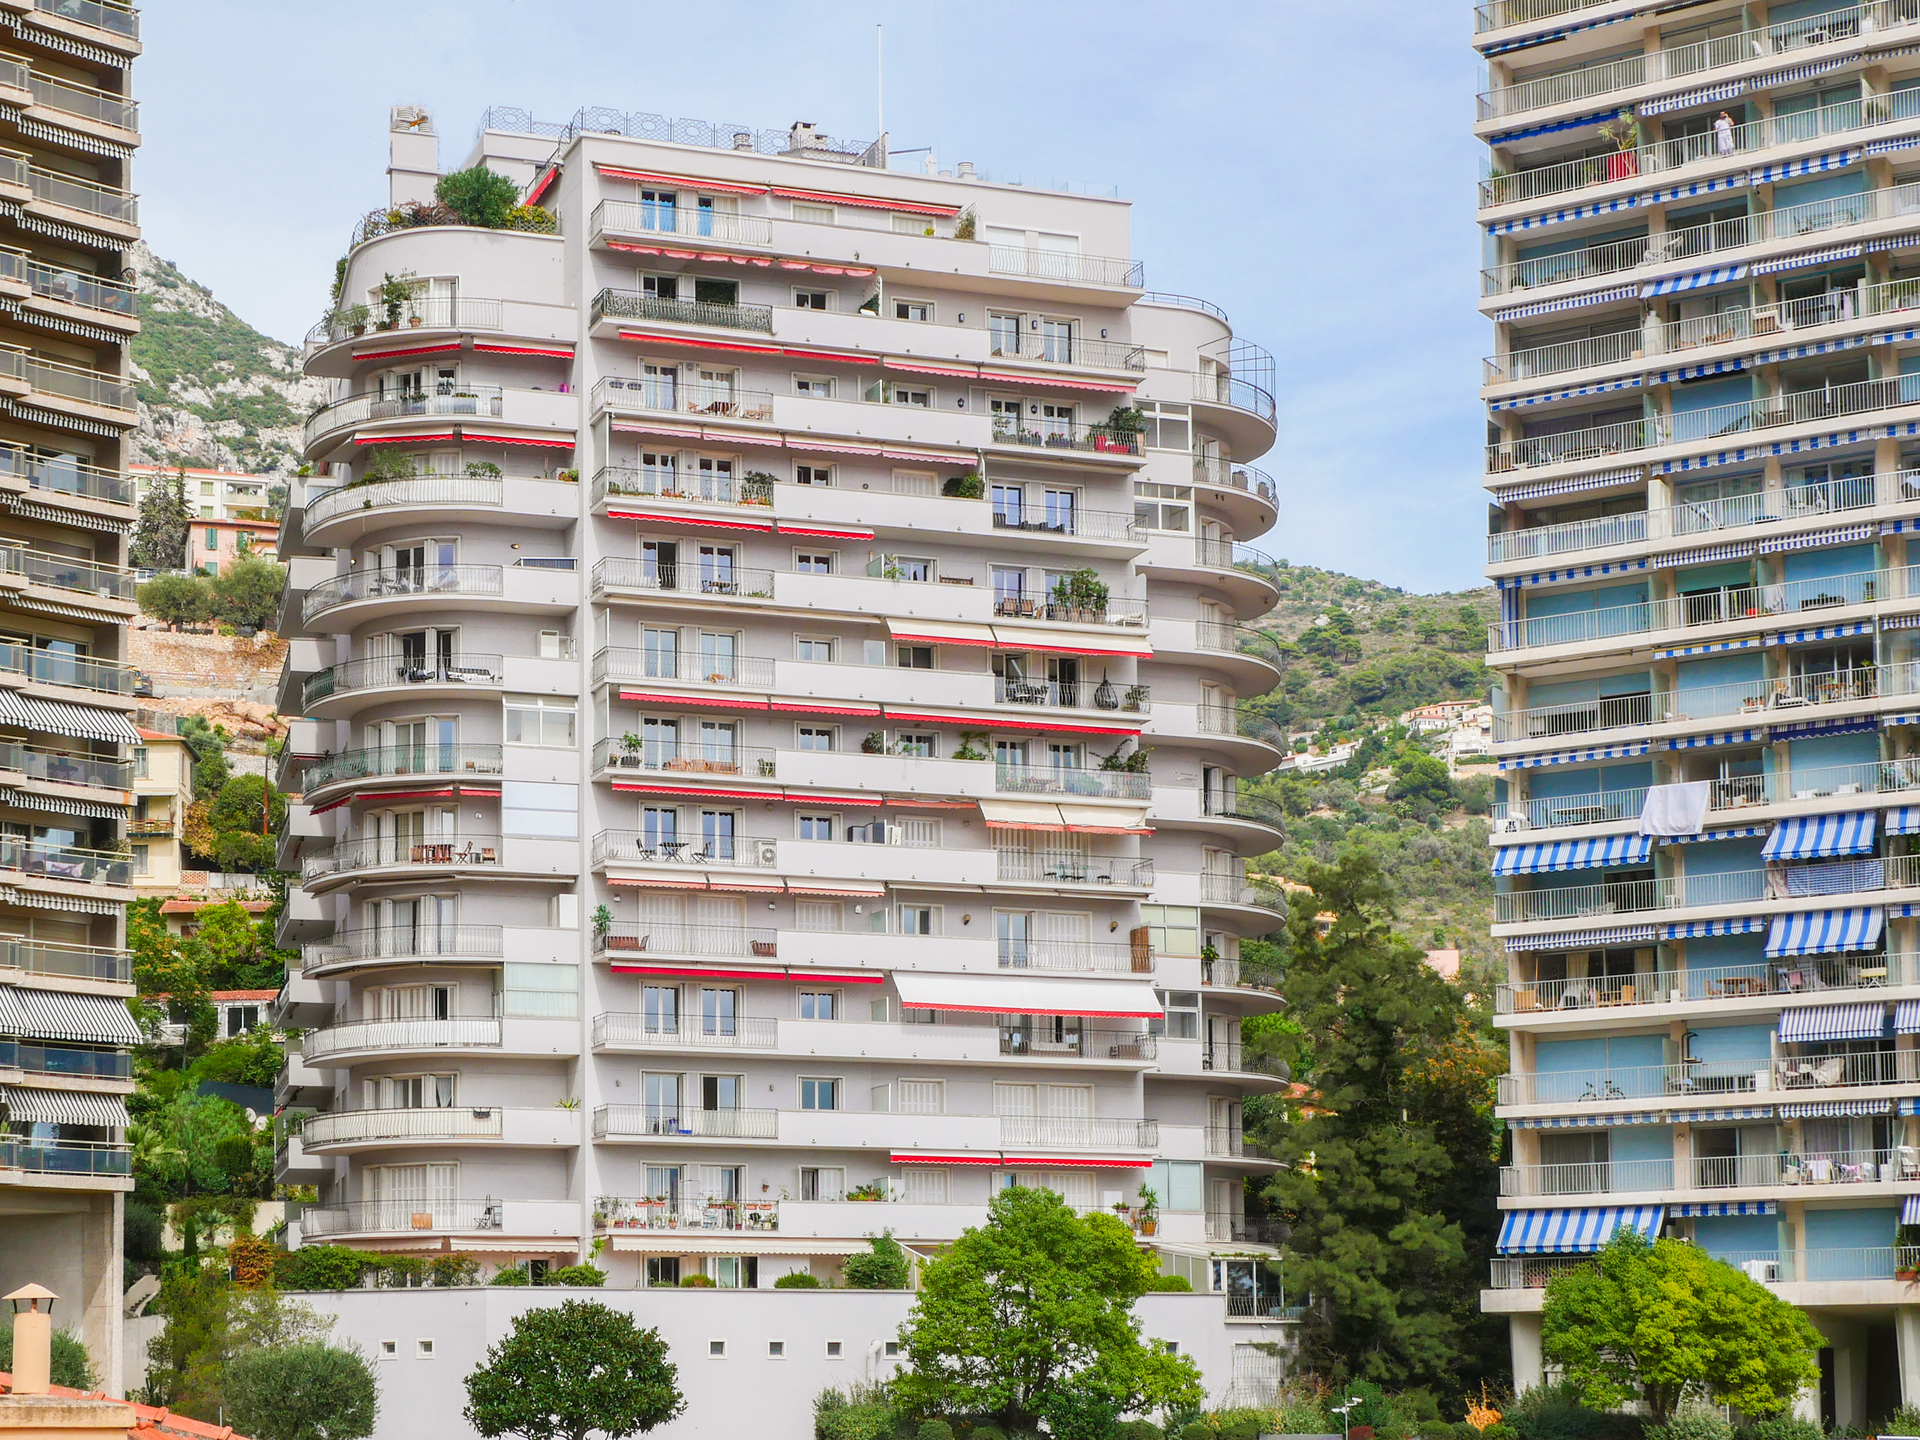 AUTEUIL - 1-BEDROOM FLAT MIXED USE - Offices for sale in Monaco